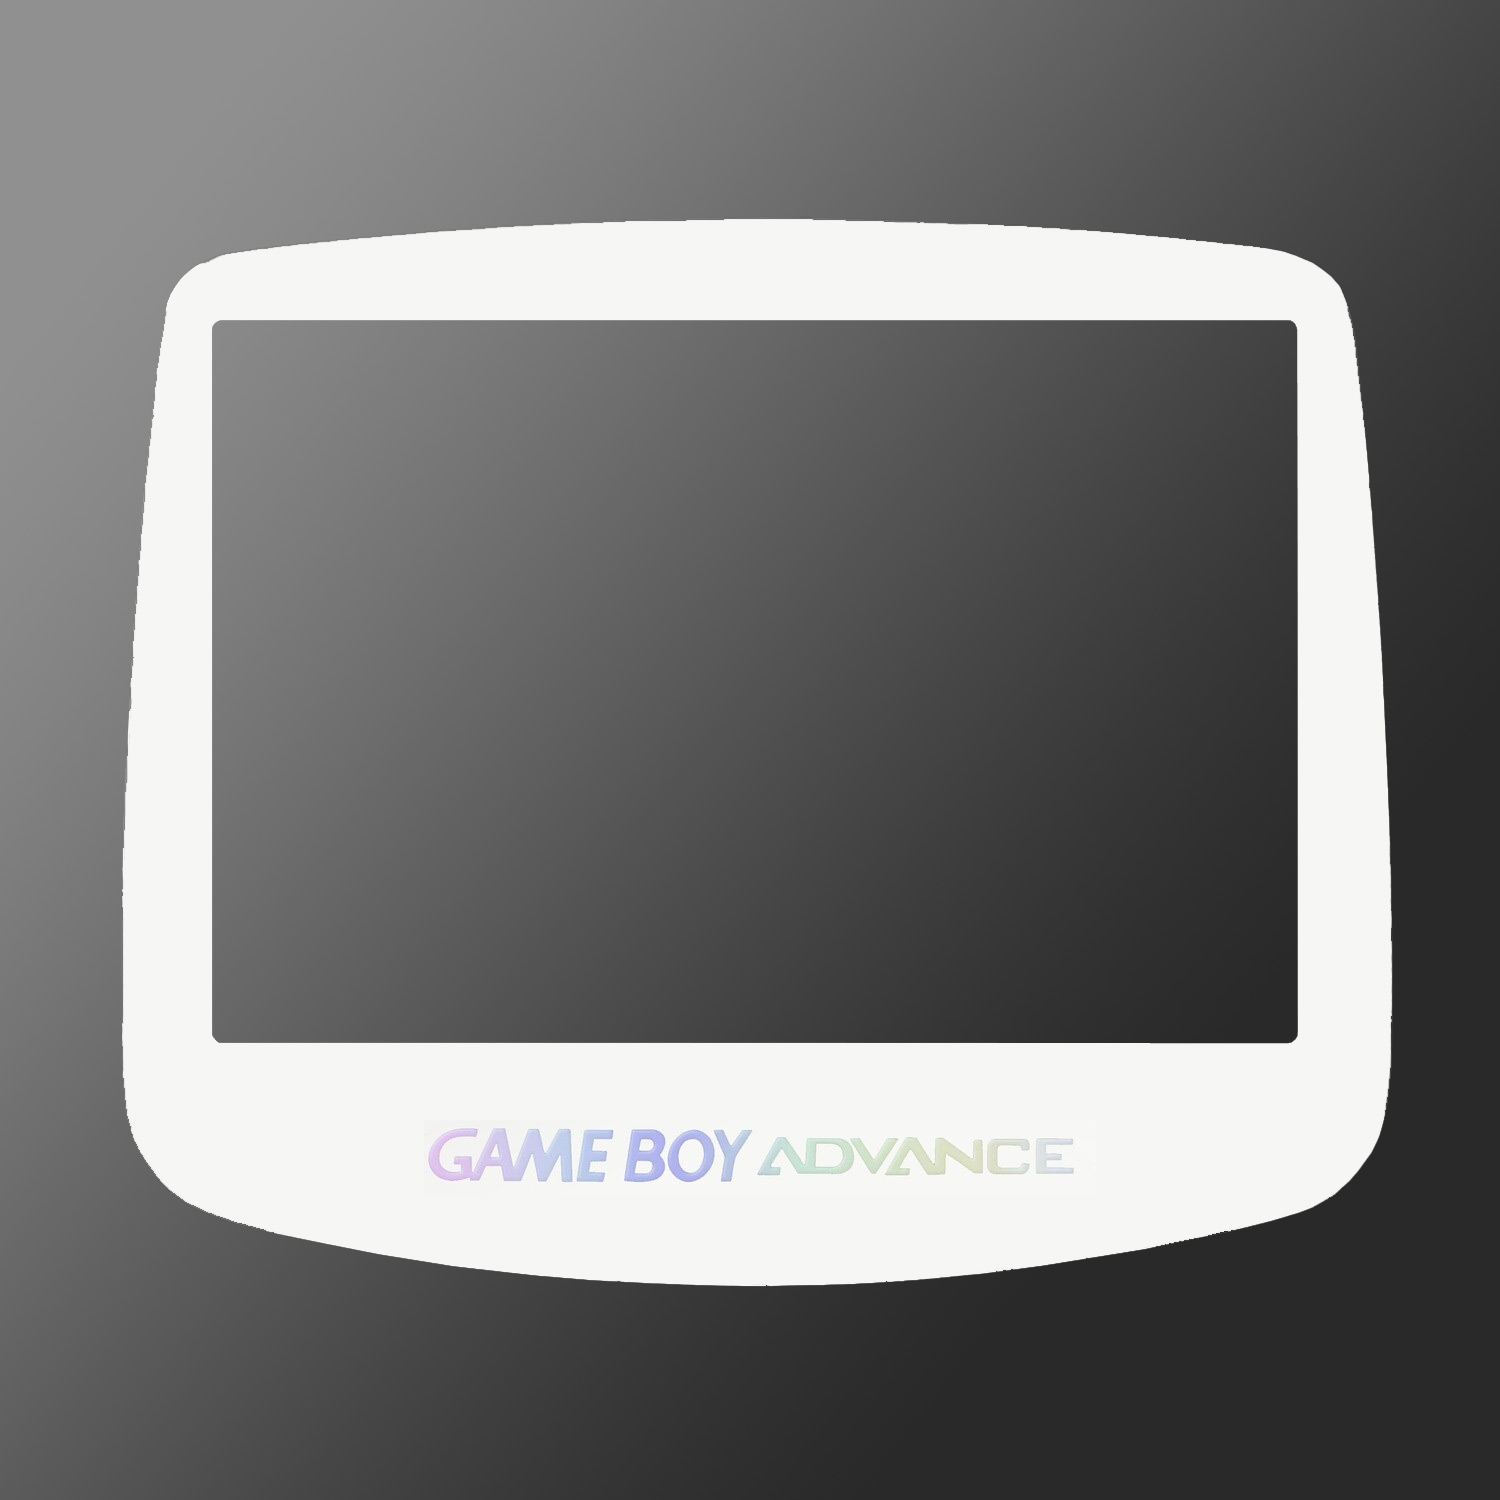 Game Boy Advance IPS Display Disc (Wit holo)